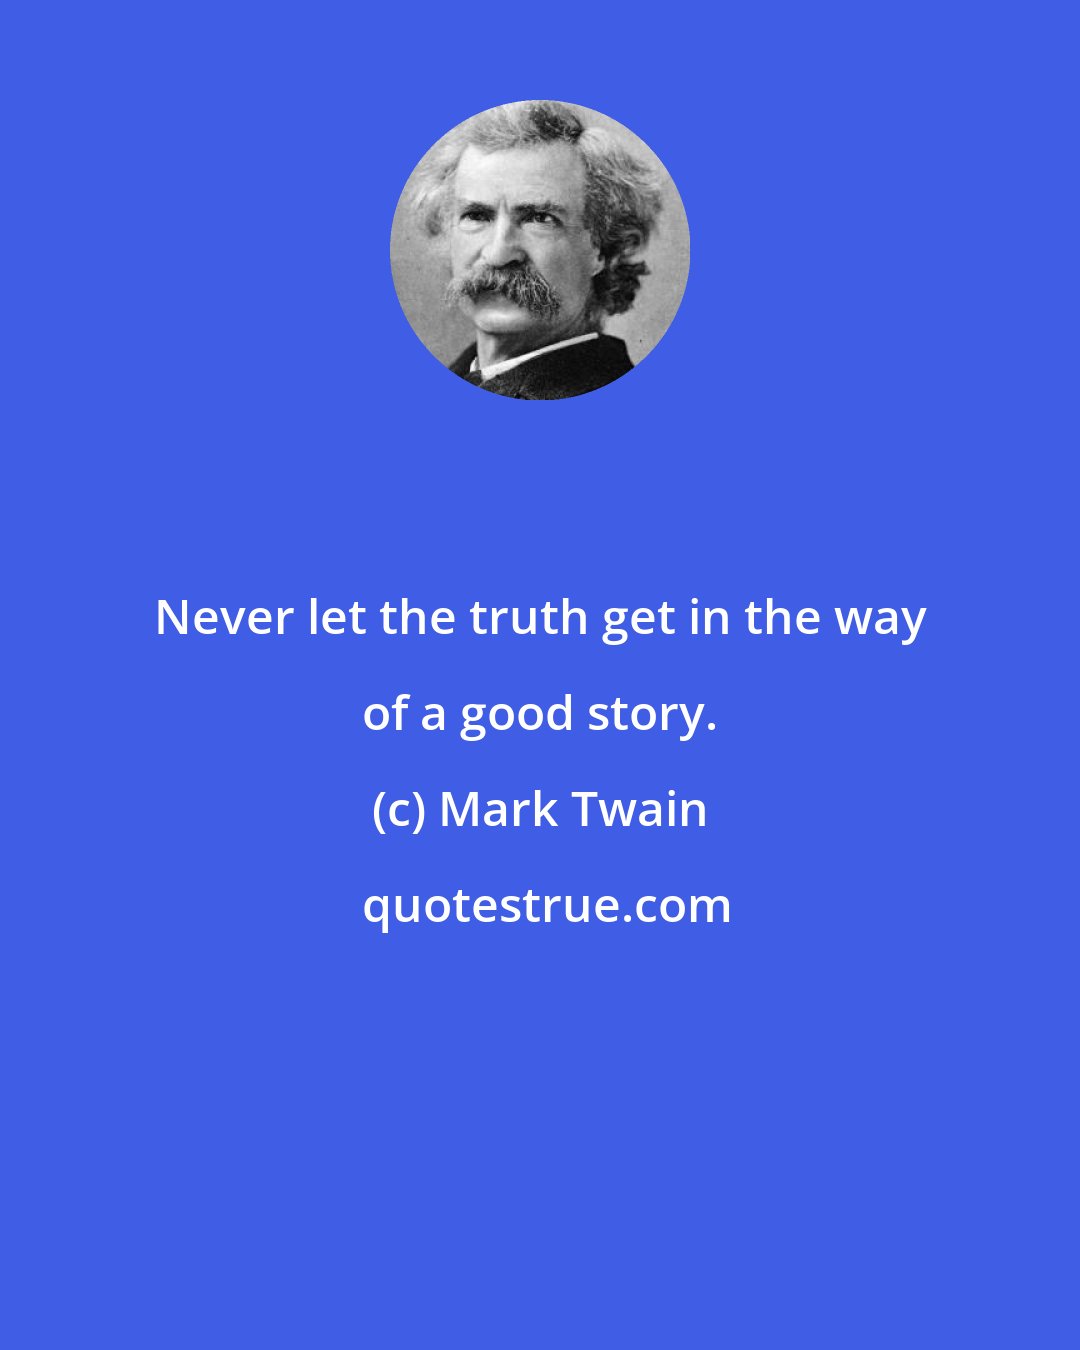 Mark Twain: Never let the truth get in the way of a good story.